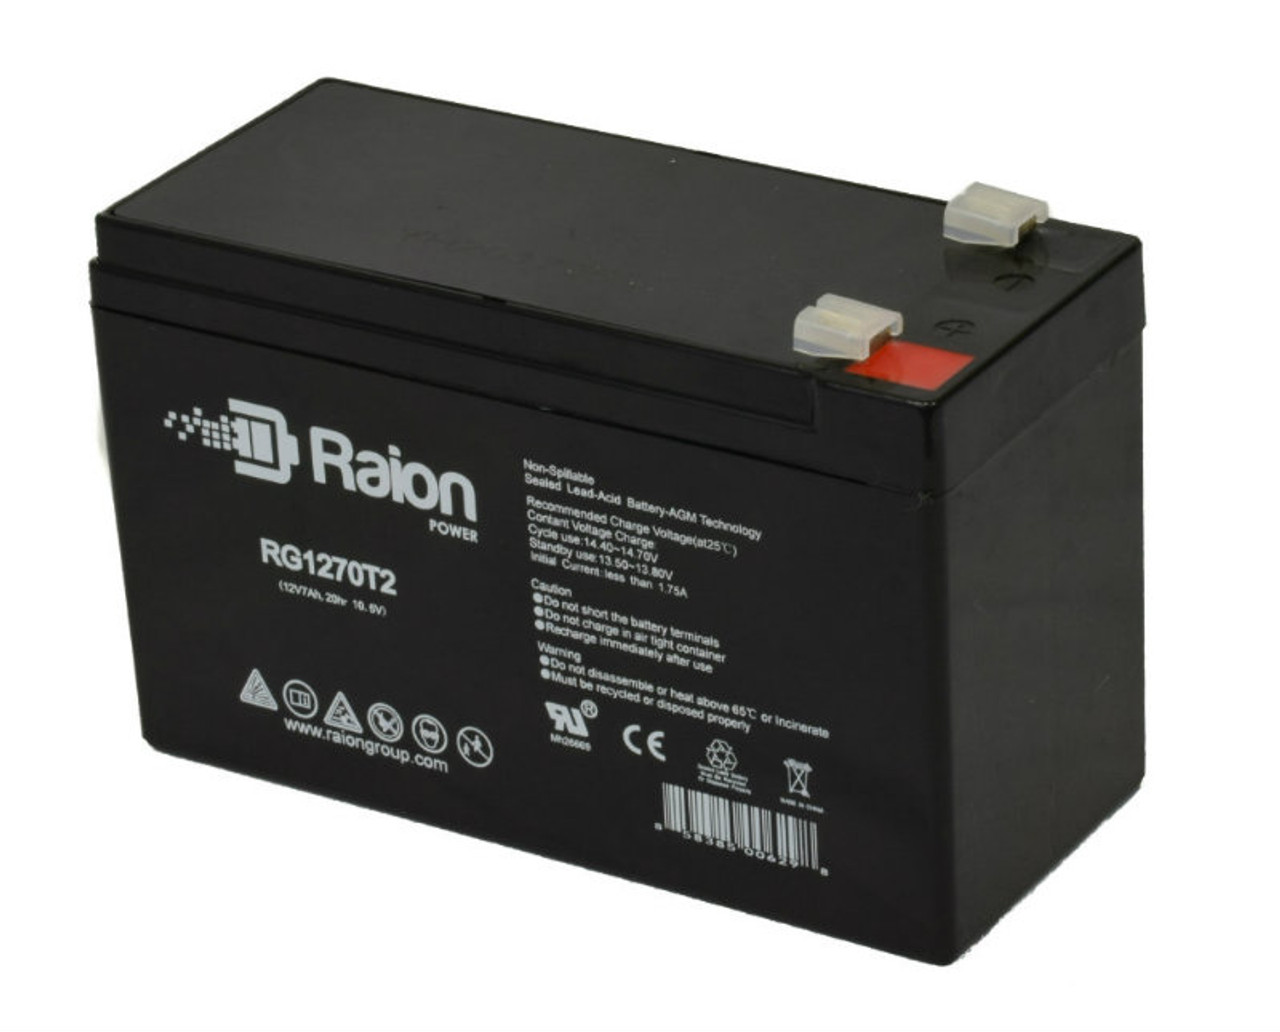 Raion Power RG1270T1 12V 7Ah Non-Spillable Replacement Battery for Europower EH 9-12